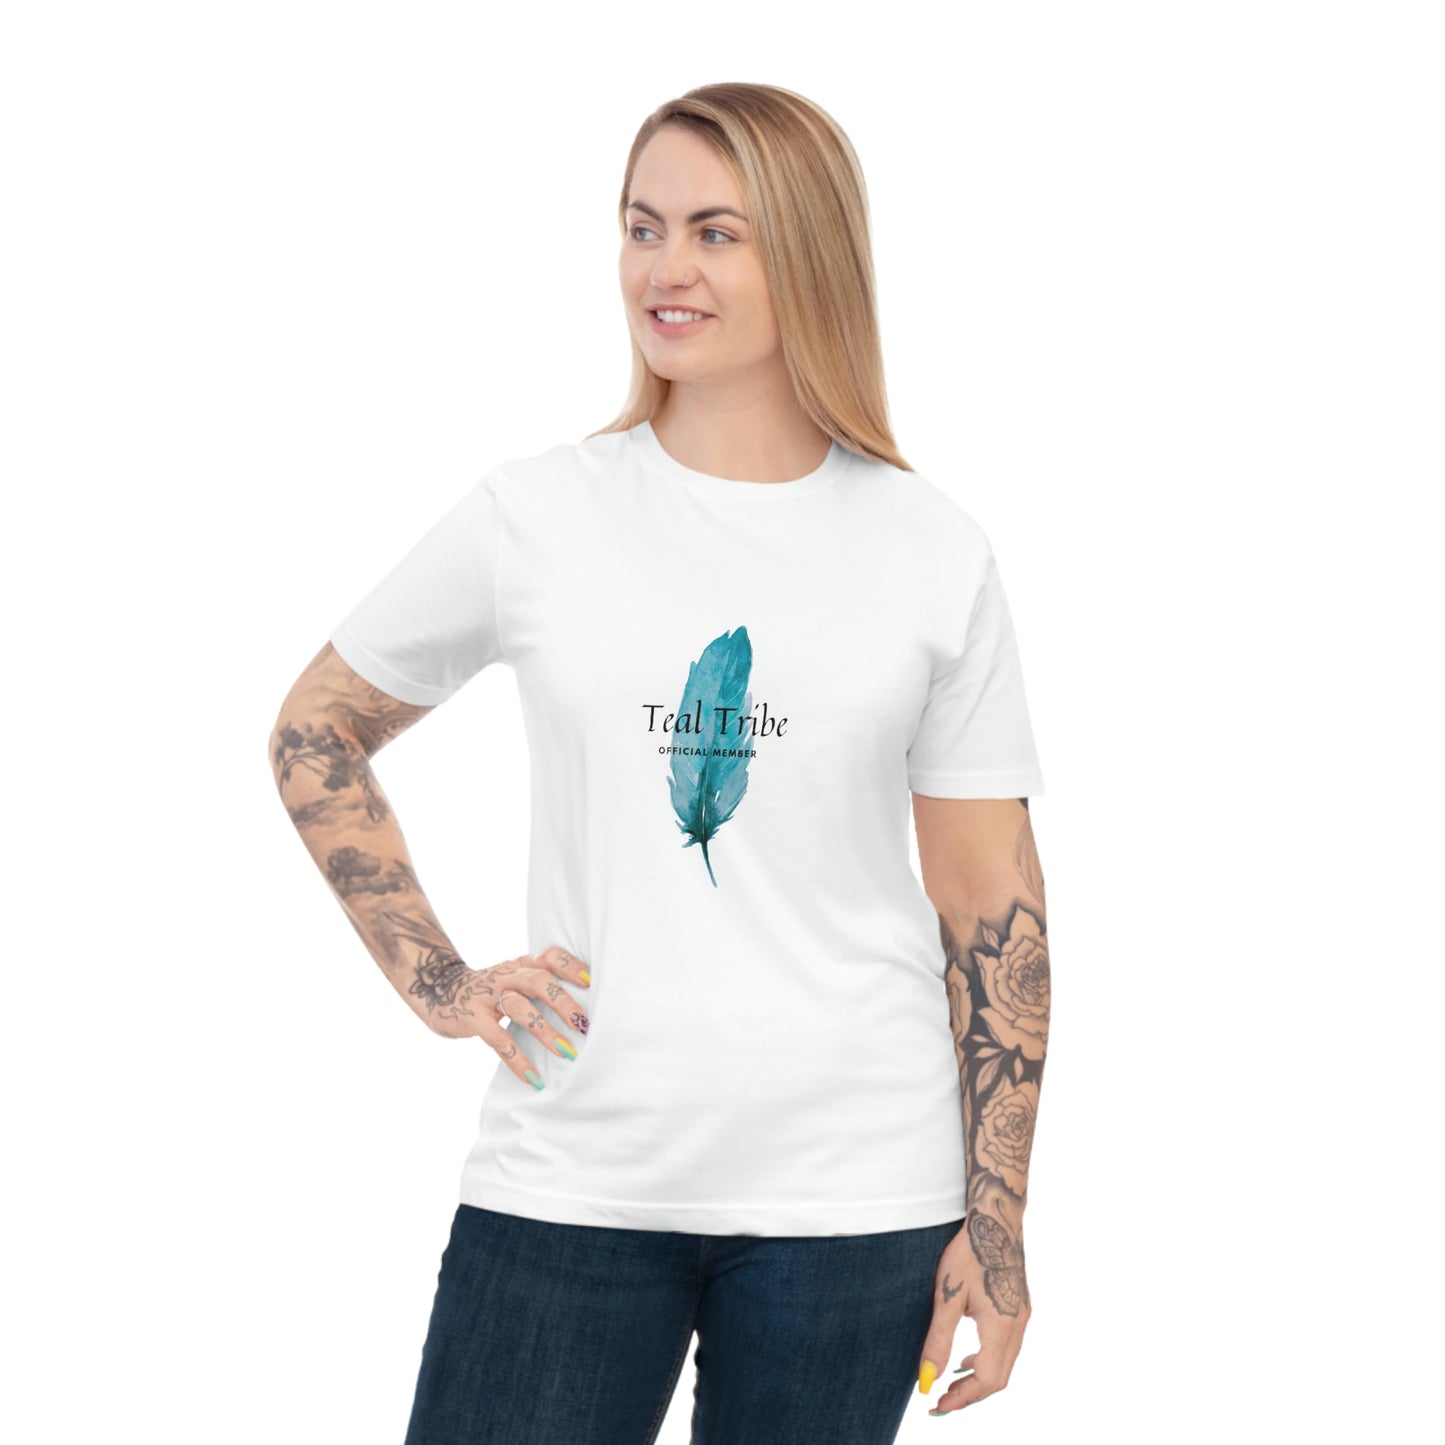 Teal Tribe Official Member T-shirt